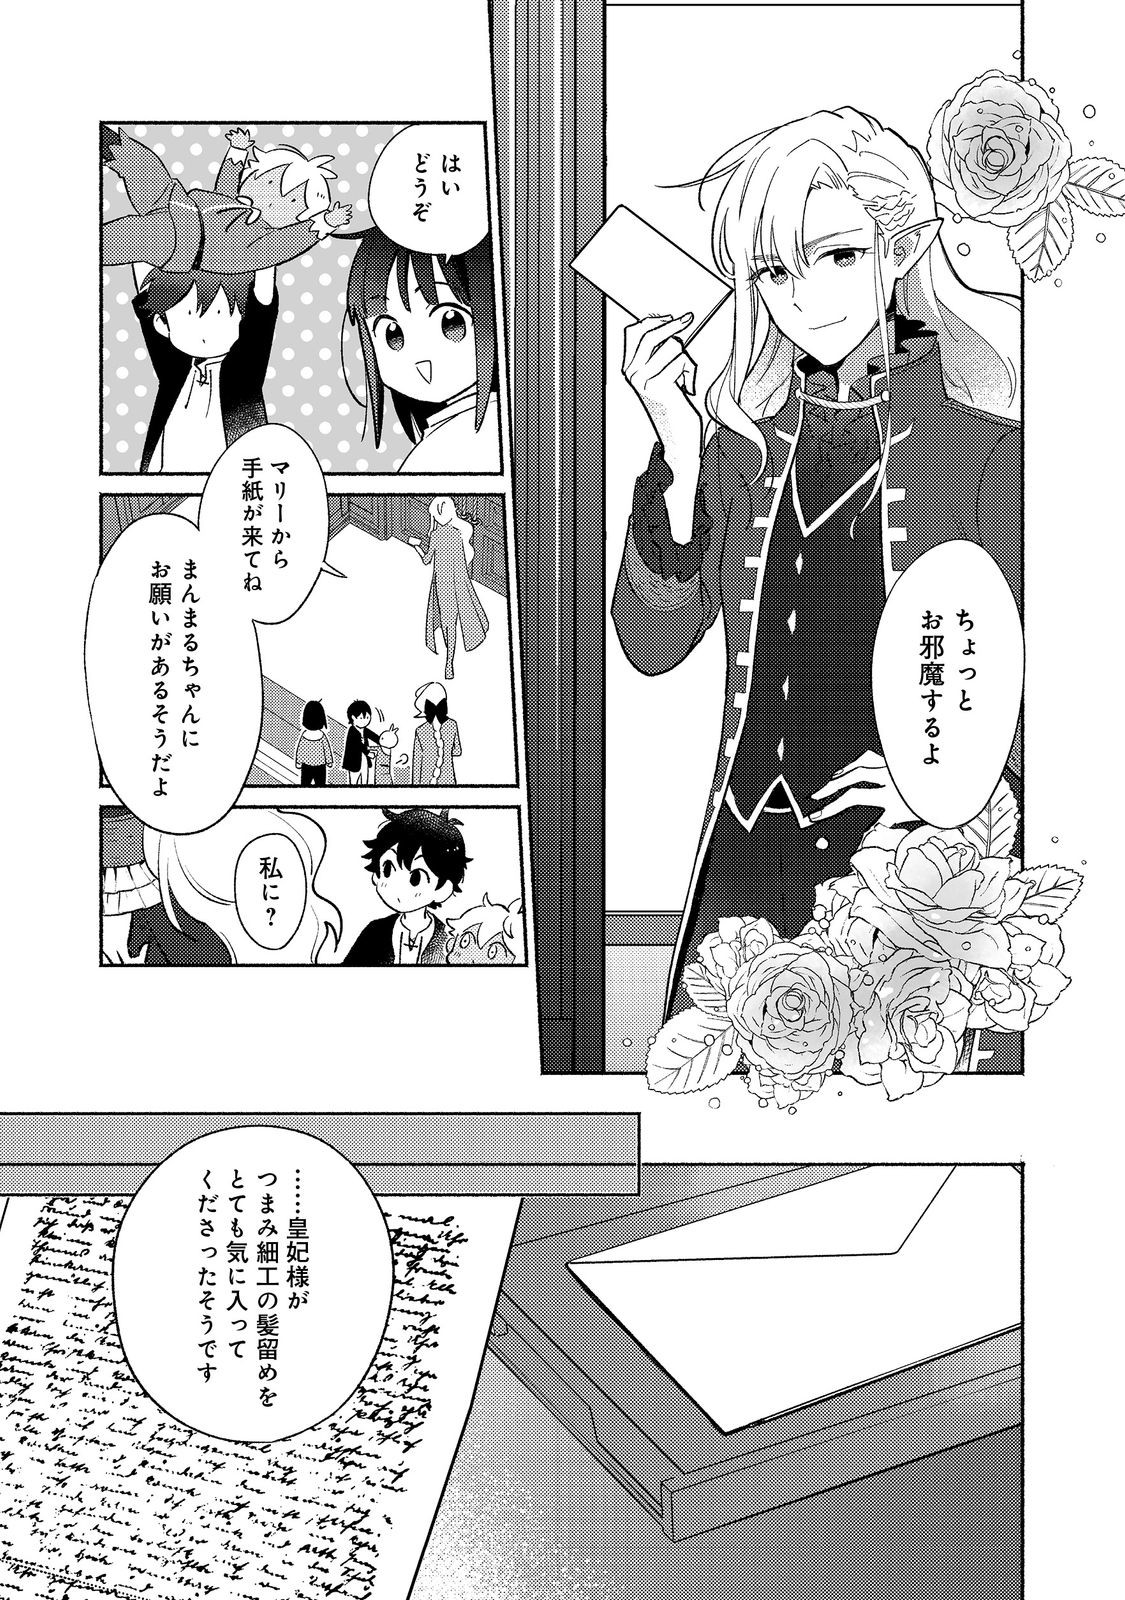 I’m the White Pig Nobleman 第19.1話 - Page 7